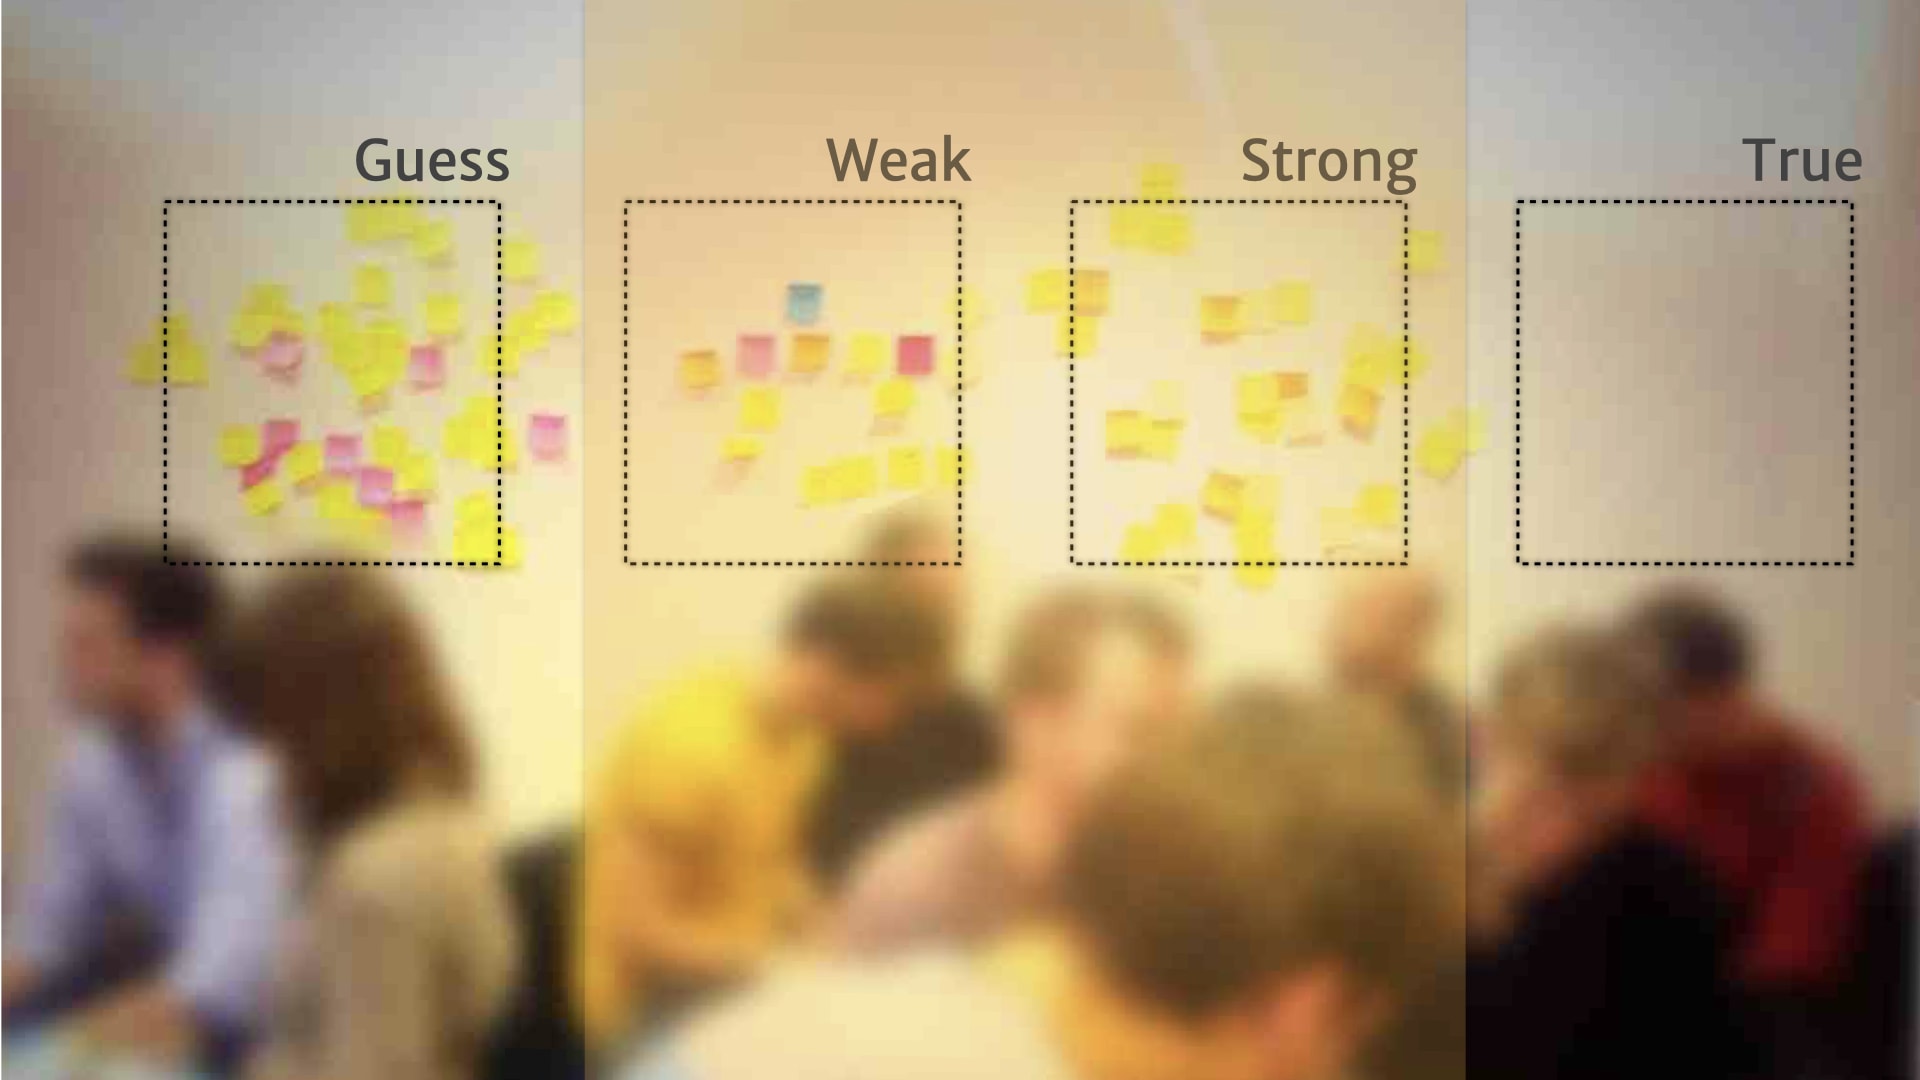 A picture of a wall of post-it notes divided into four categories running left to right (Guess, Weak, Strong, and True). The Weak and Strong categories are highlighted in yellow.